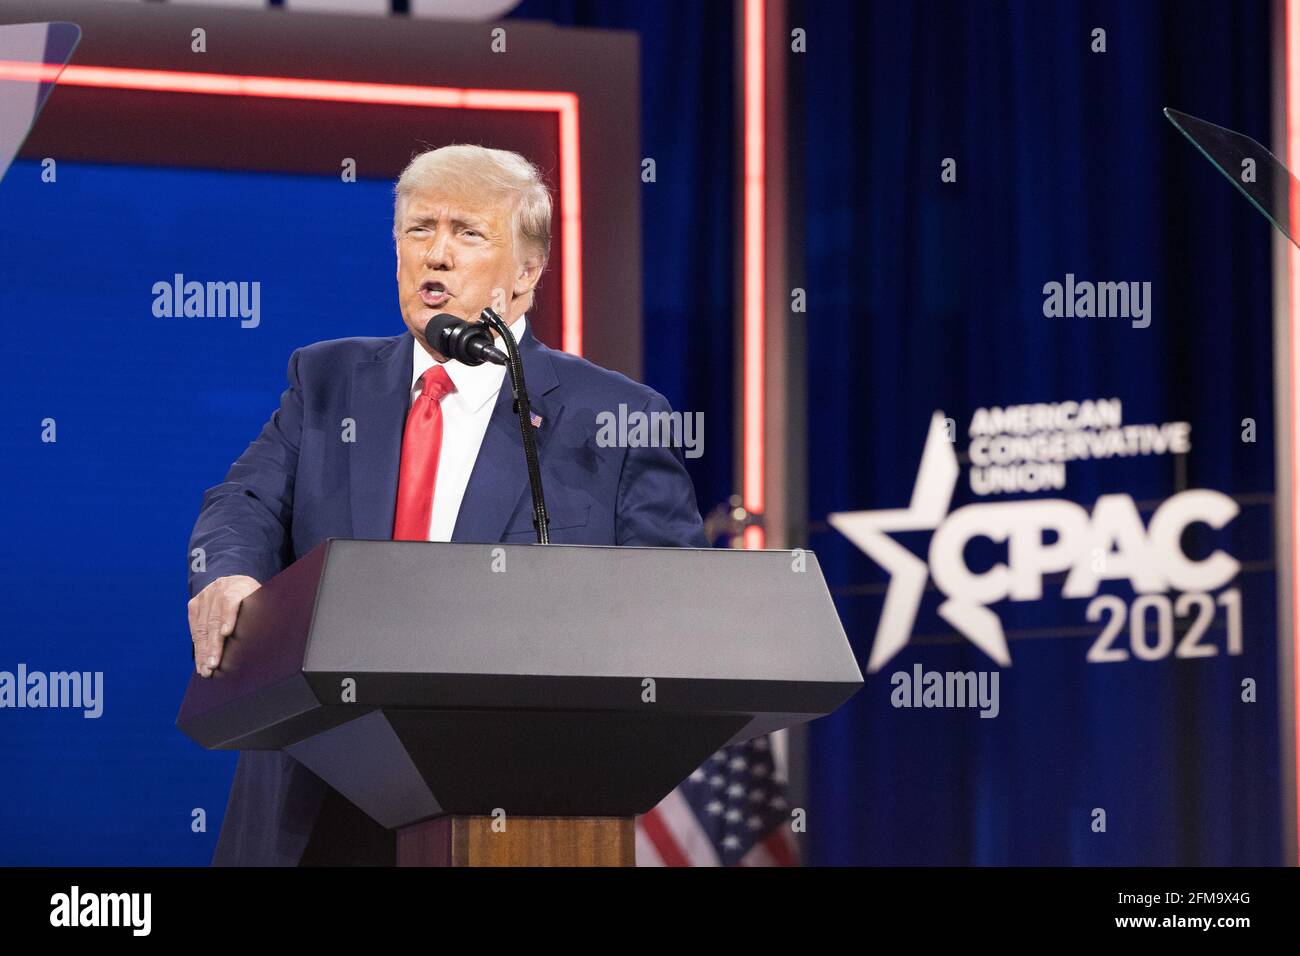 Orlando, Fla. 28 Feb 2021- Fmr. President Donald J. Trump delivers remarks at the Conservative Political Action Conference Stock Photo